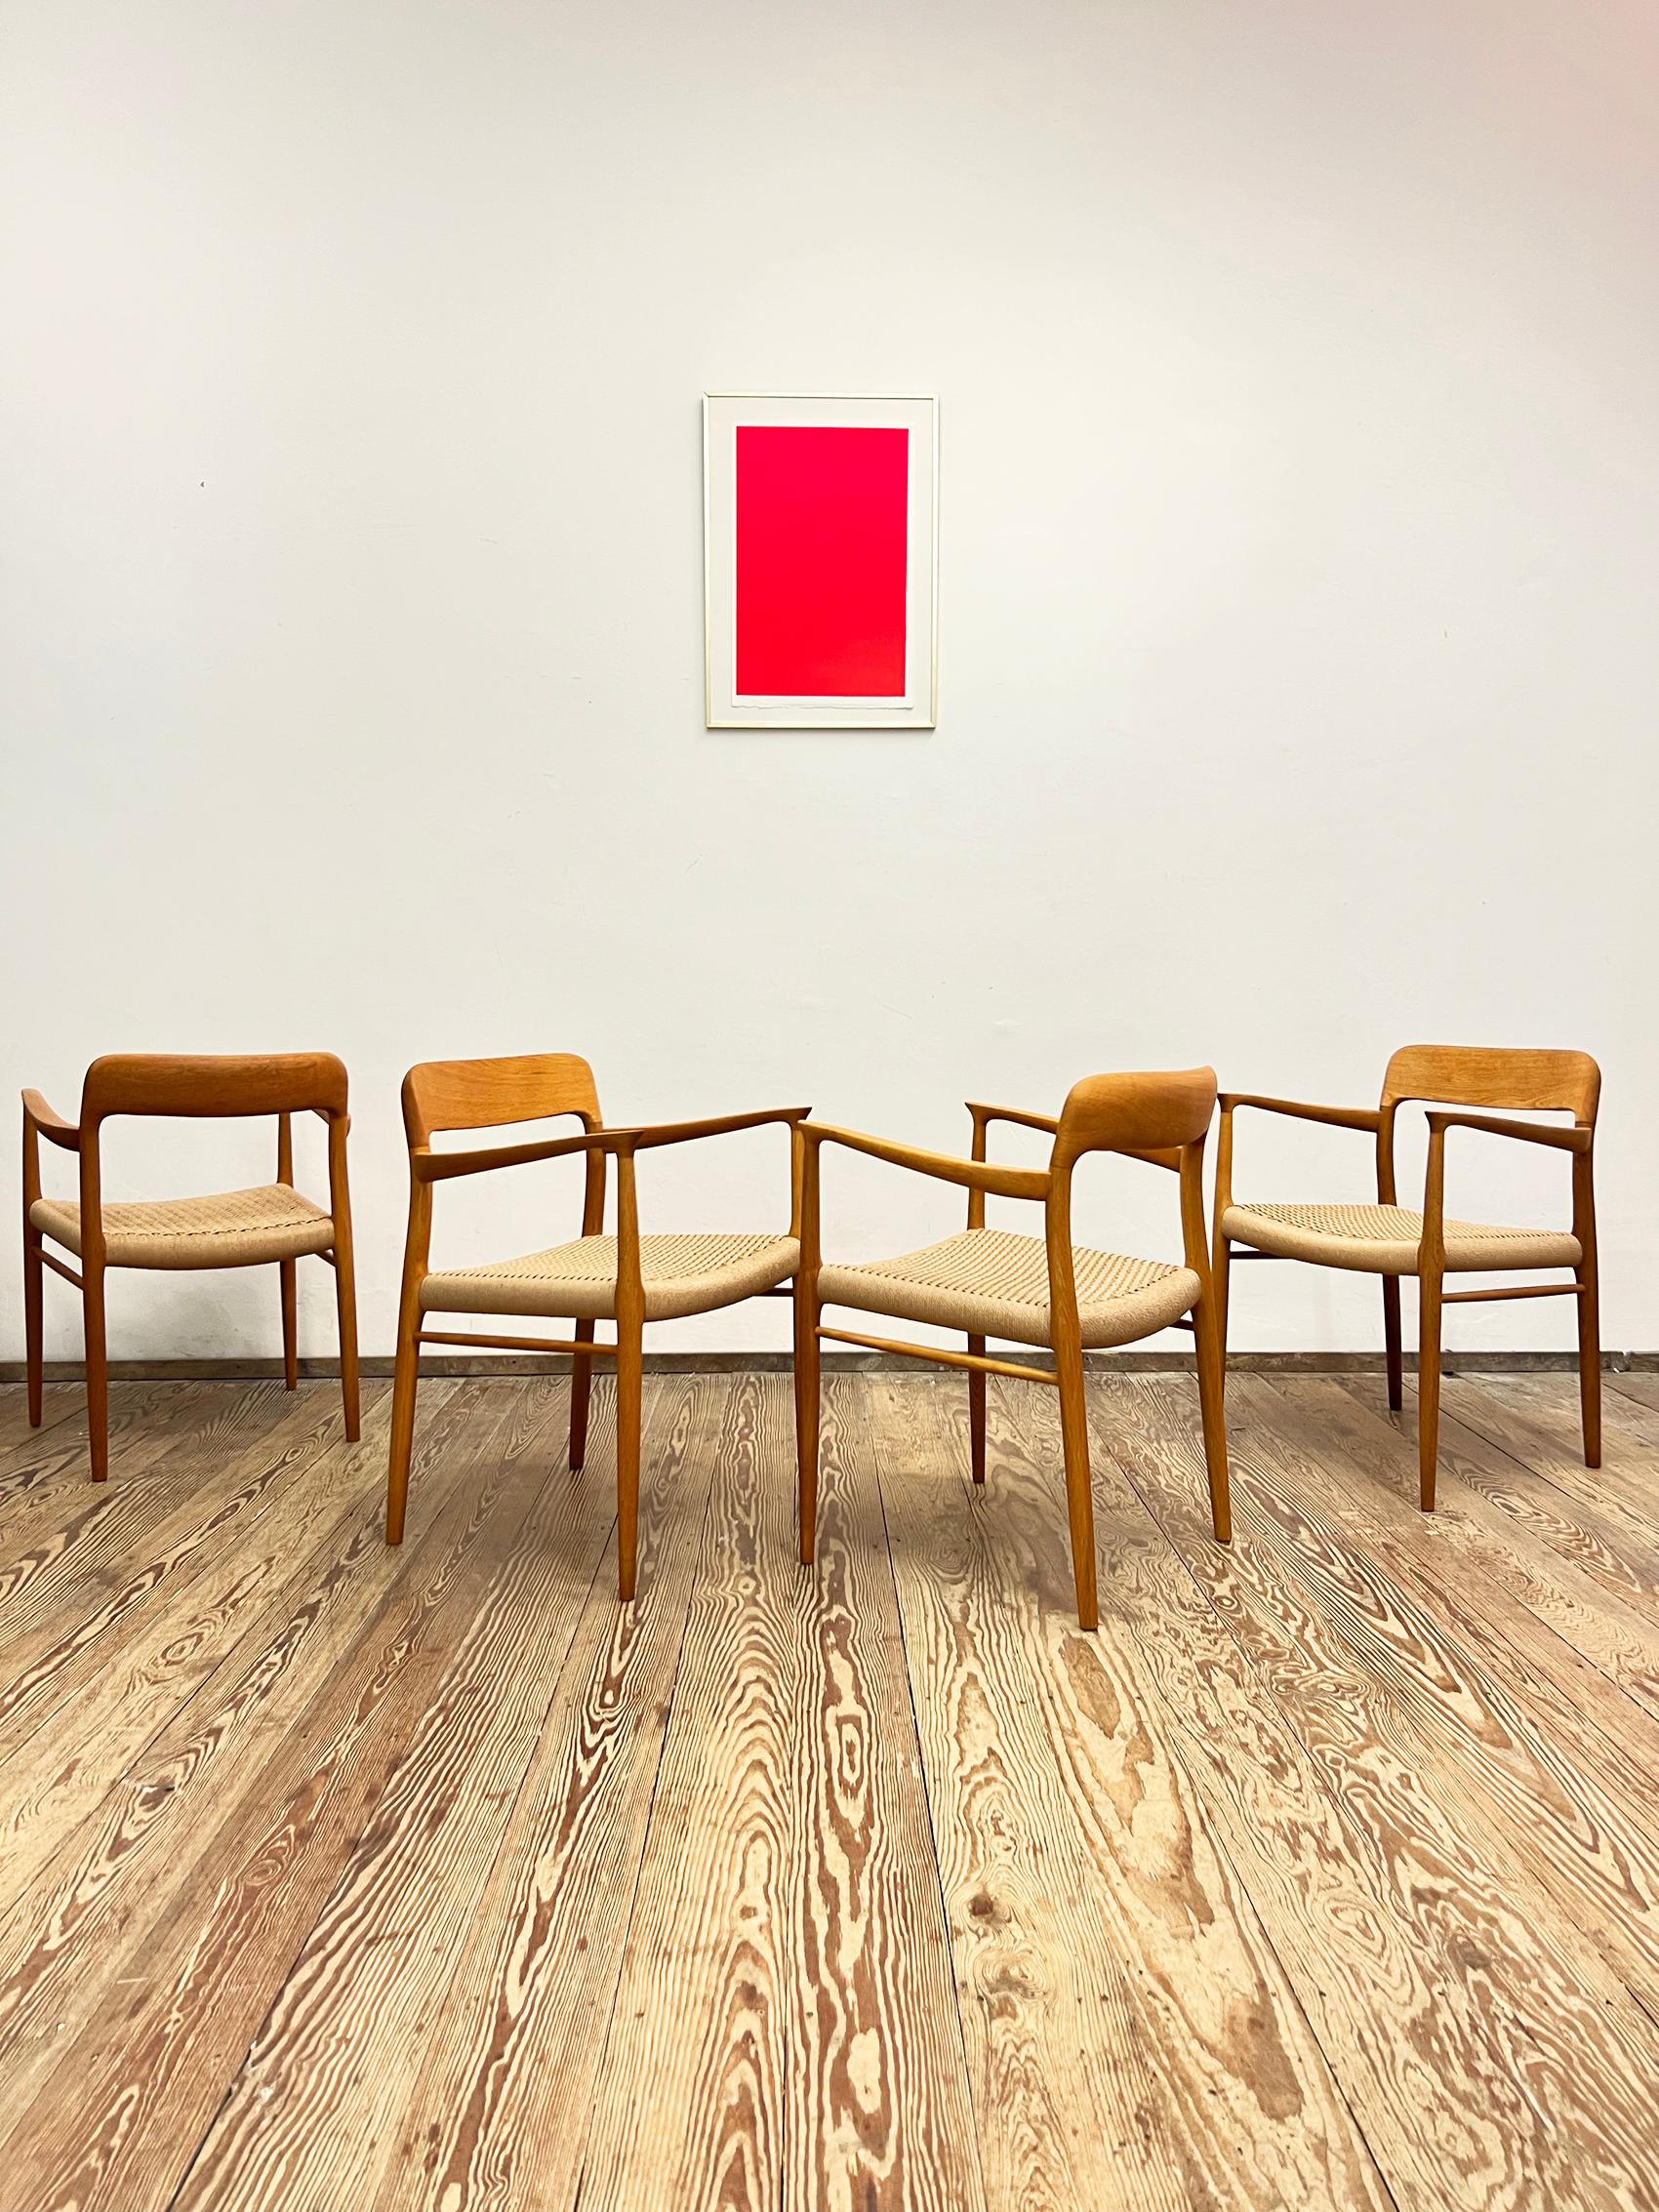 Dimensions Armrest chairs: 58x56x76x44cm (Width x Deph x Height x Seating Height)

Danish Design by Niels O. Møller manufacured by J.L. Møllers in Denmark in the 1950s. The set features 4 extremely rare dining chairs model 56 with armrests, a